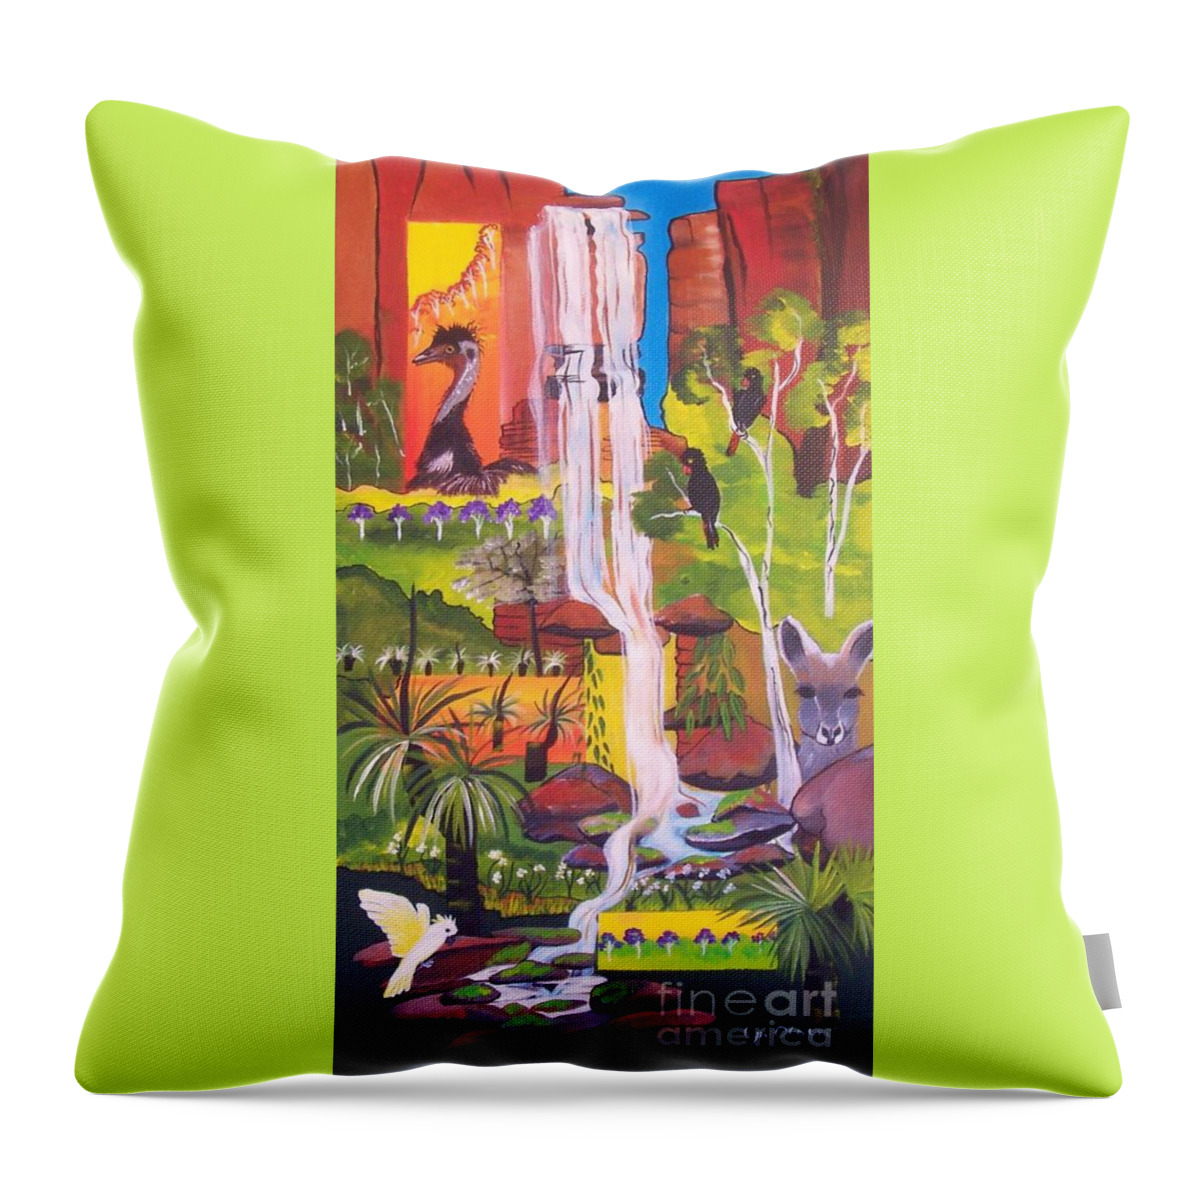 Nature Throw Pillow featuring the painting Nature Windows by Lyn Olsen